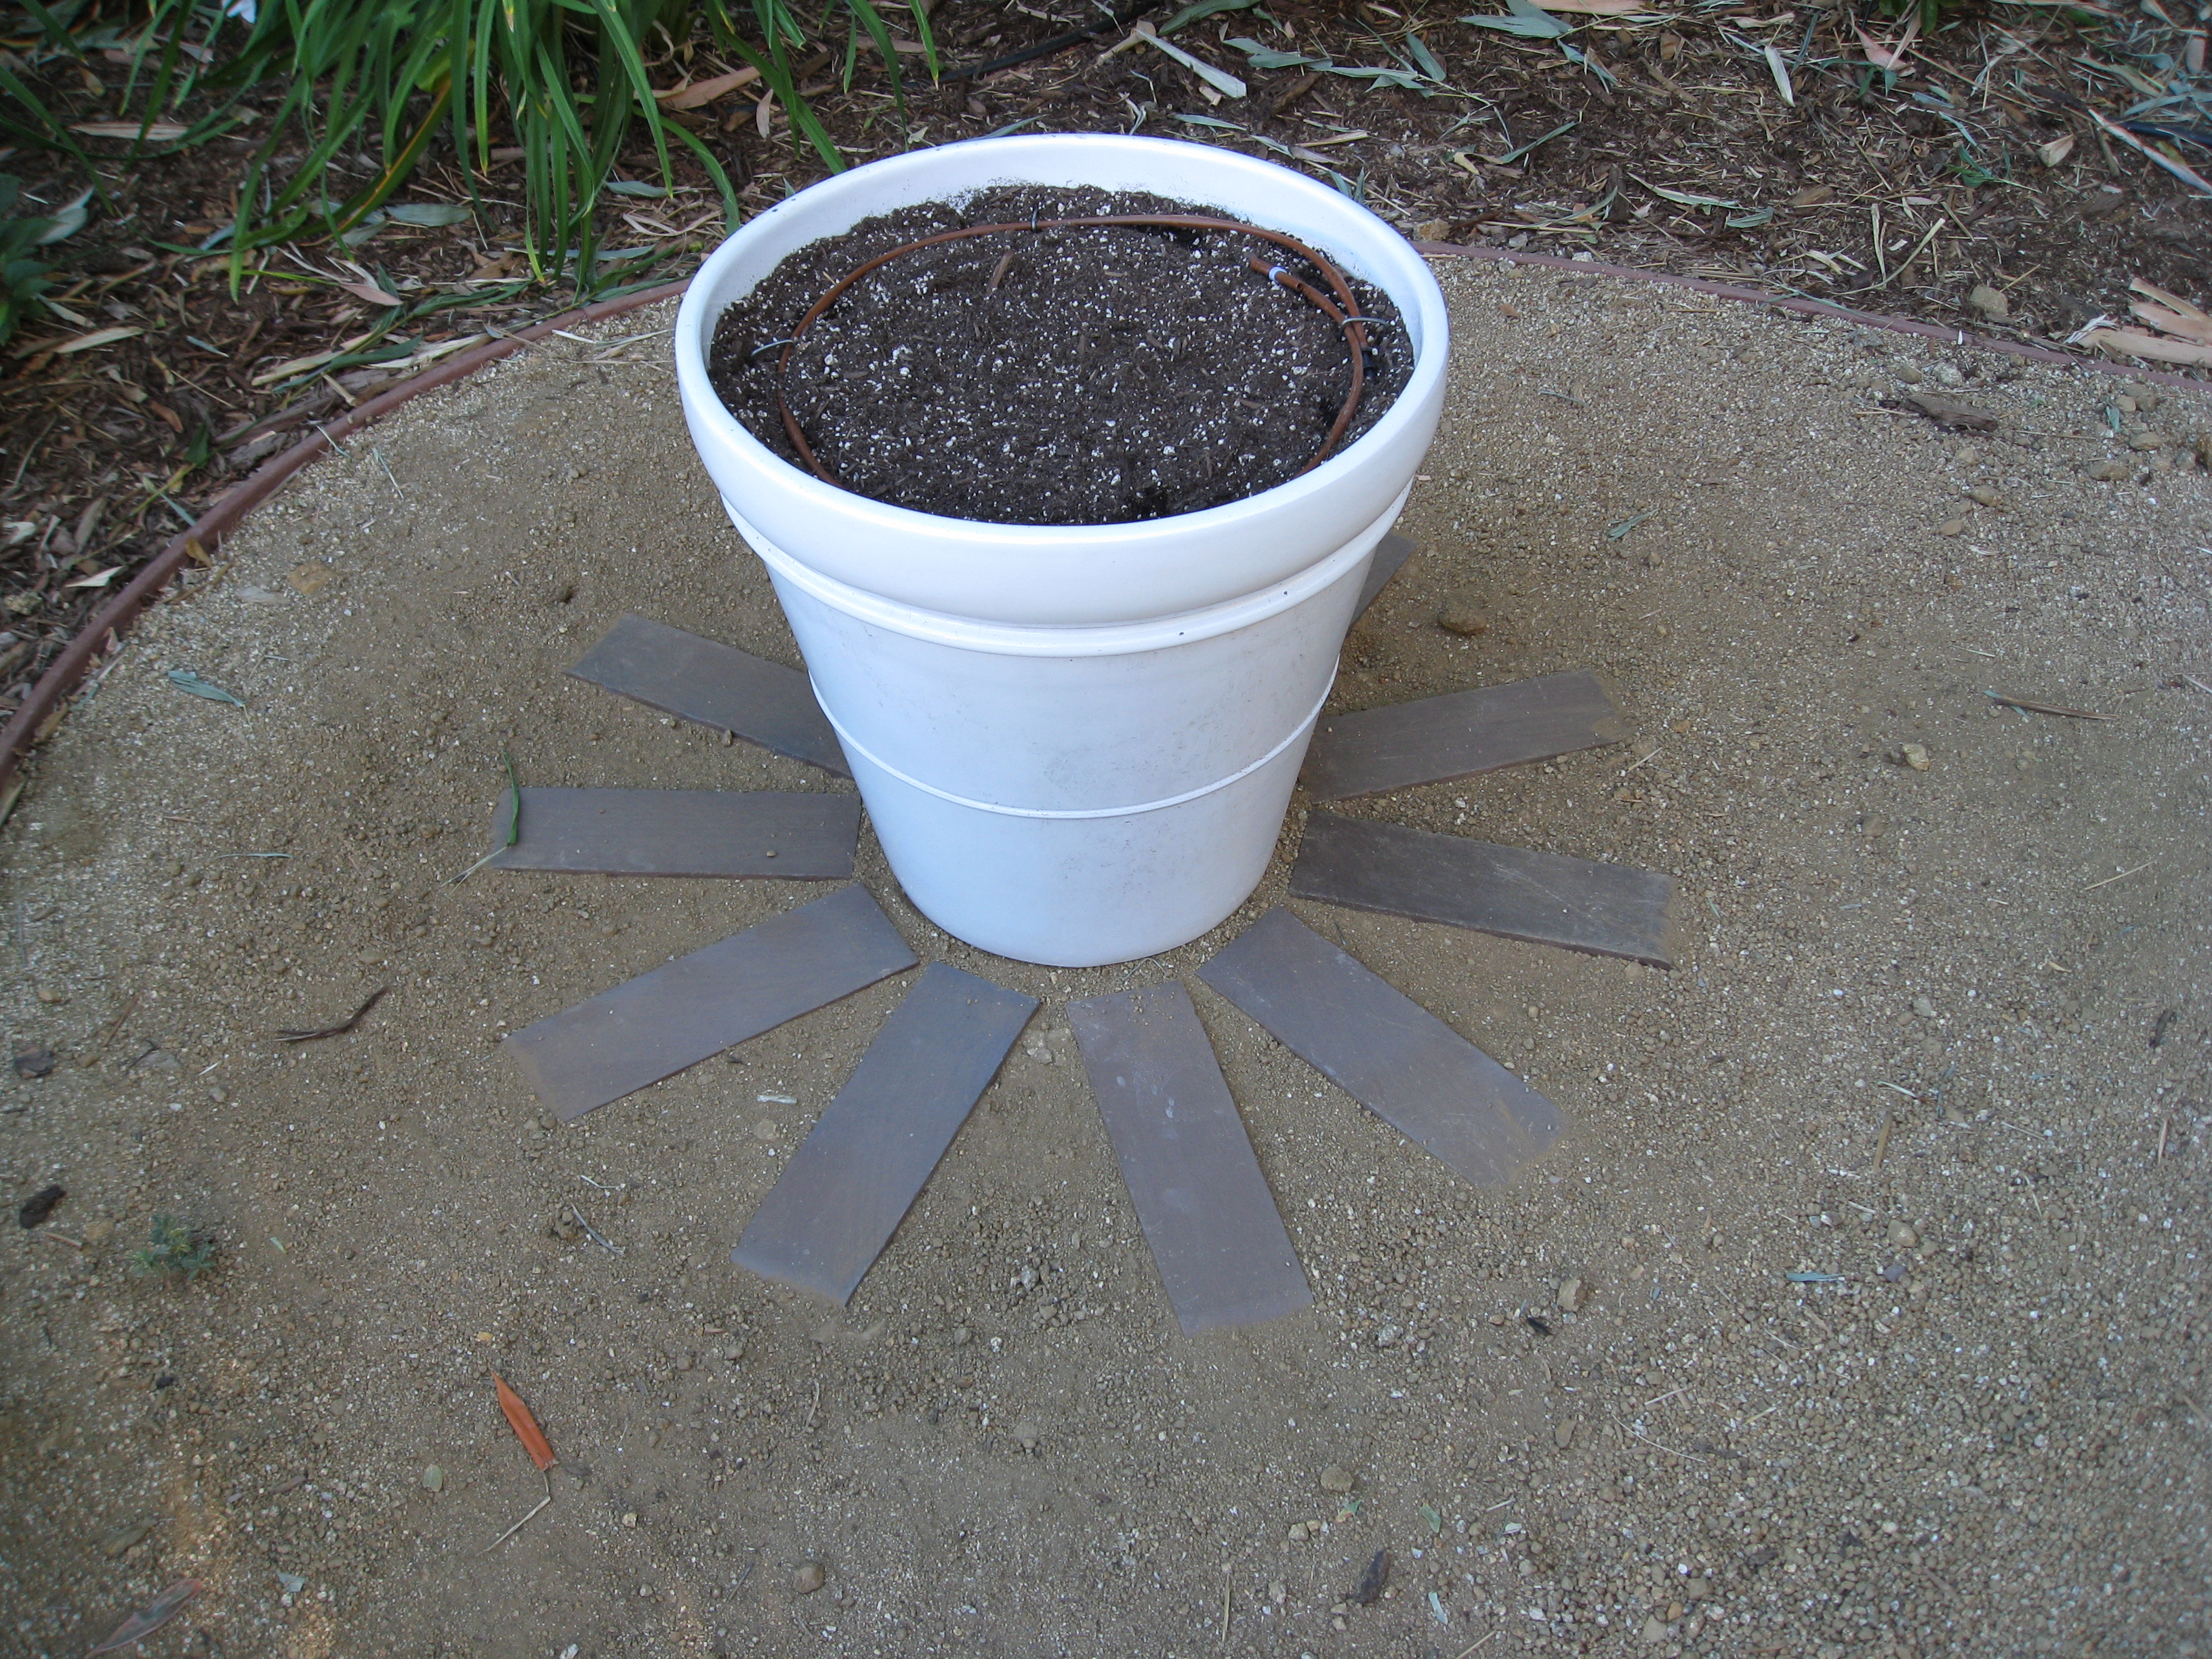 We used leftover bricks from the pool edge to anchor a flower pot nearby.